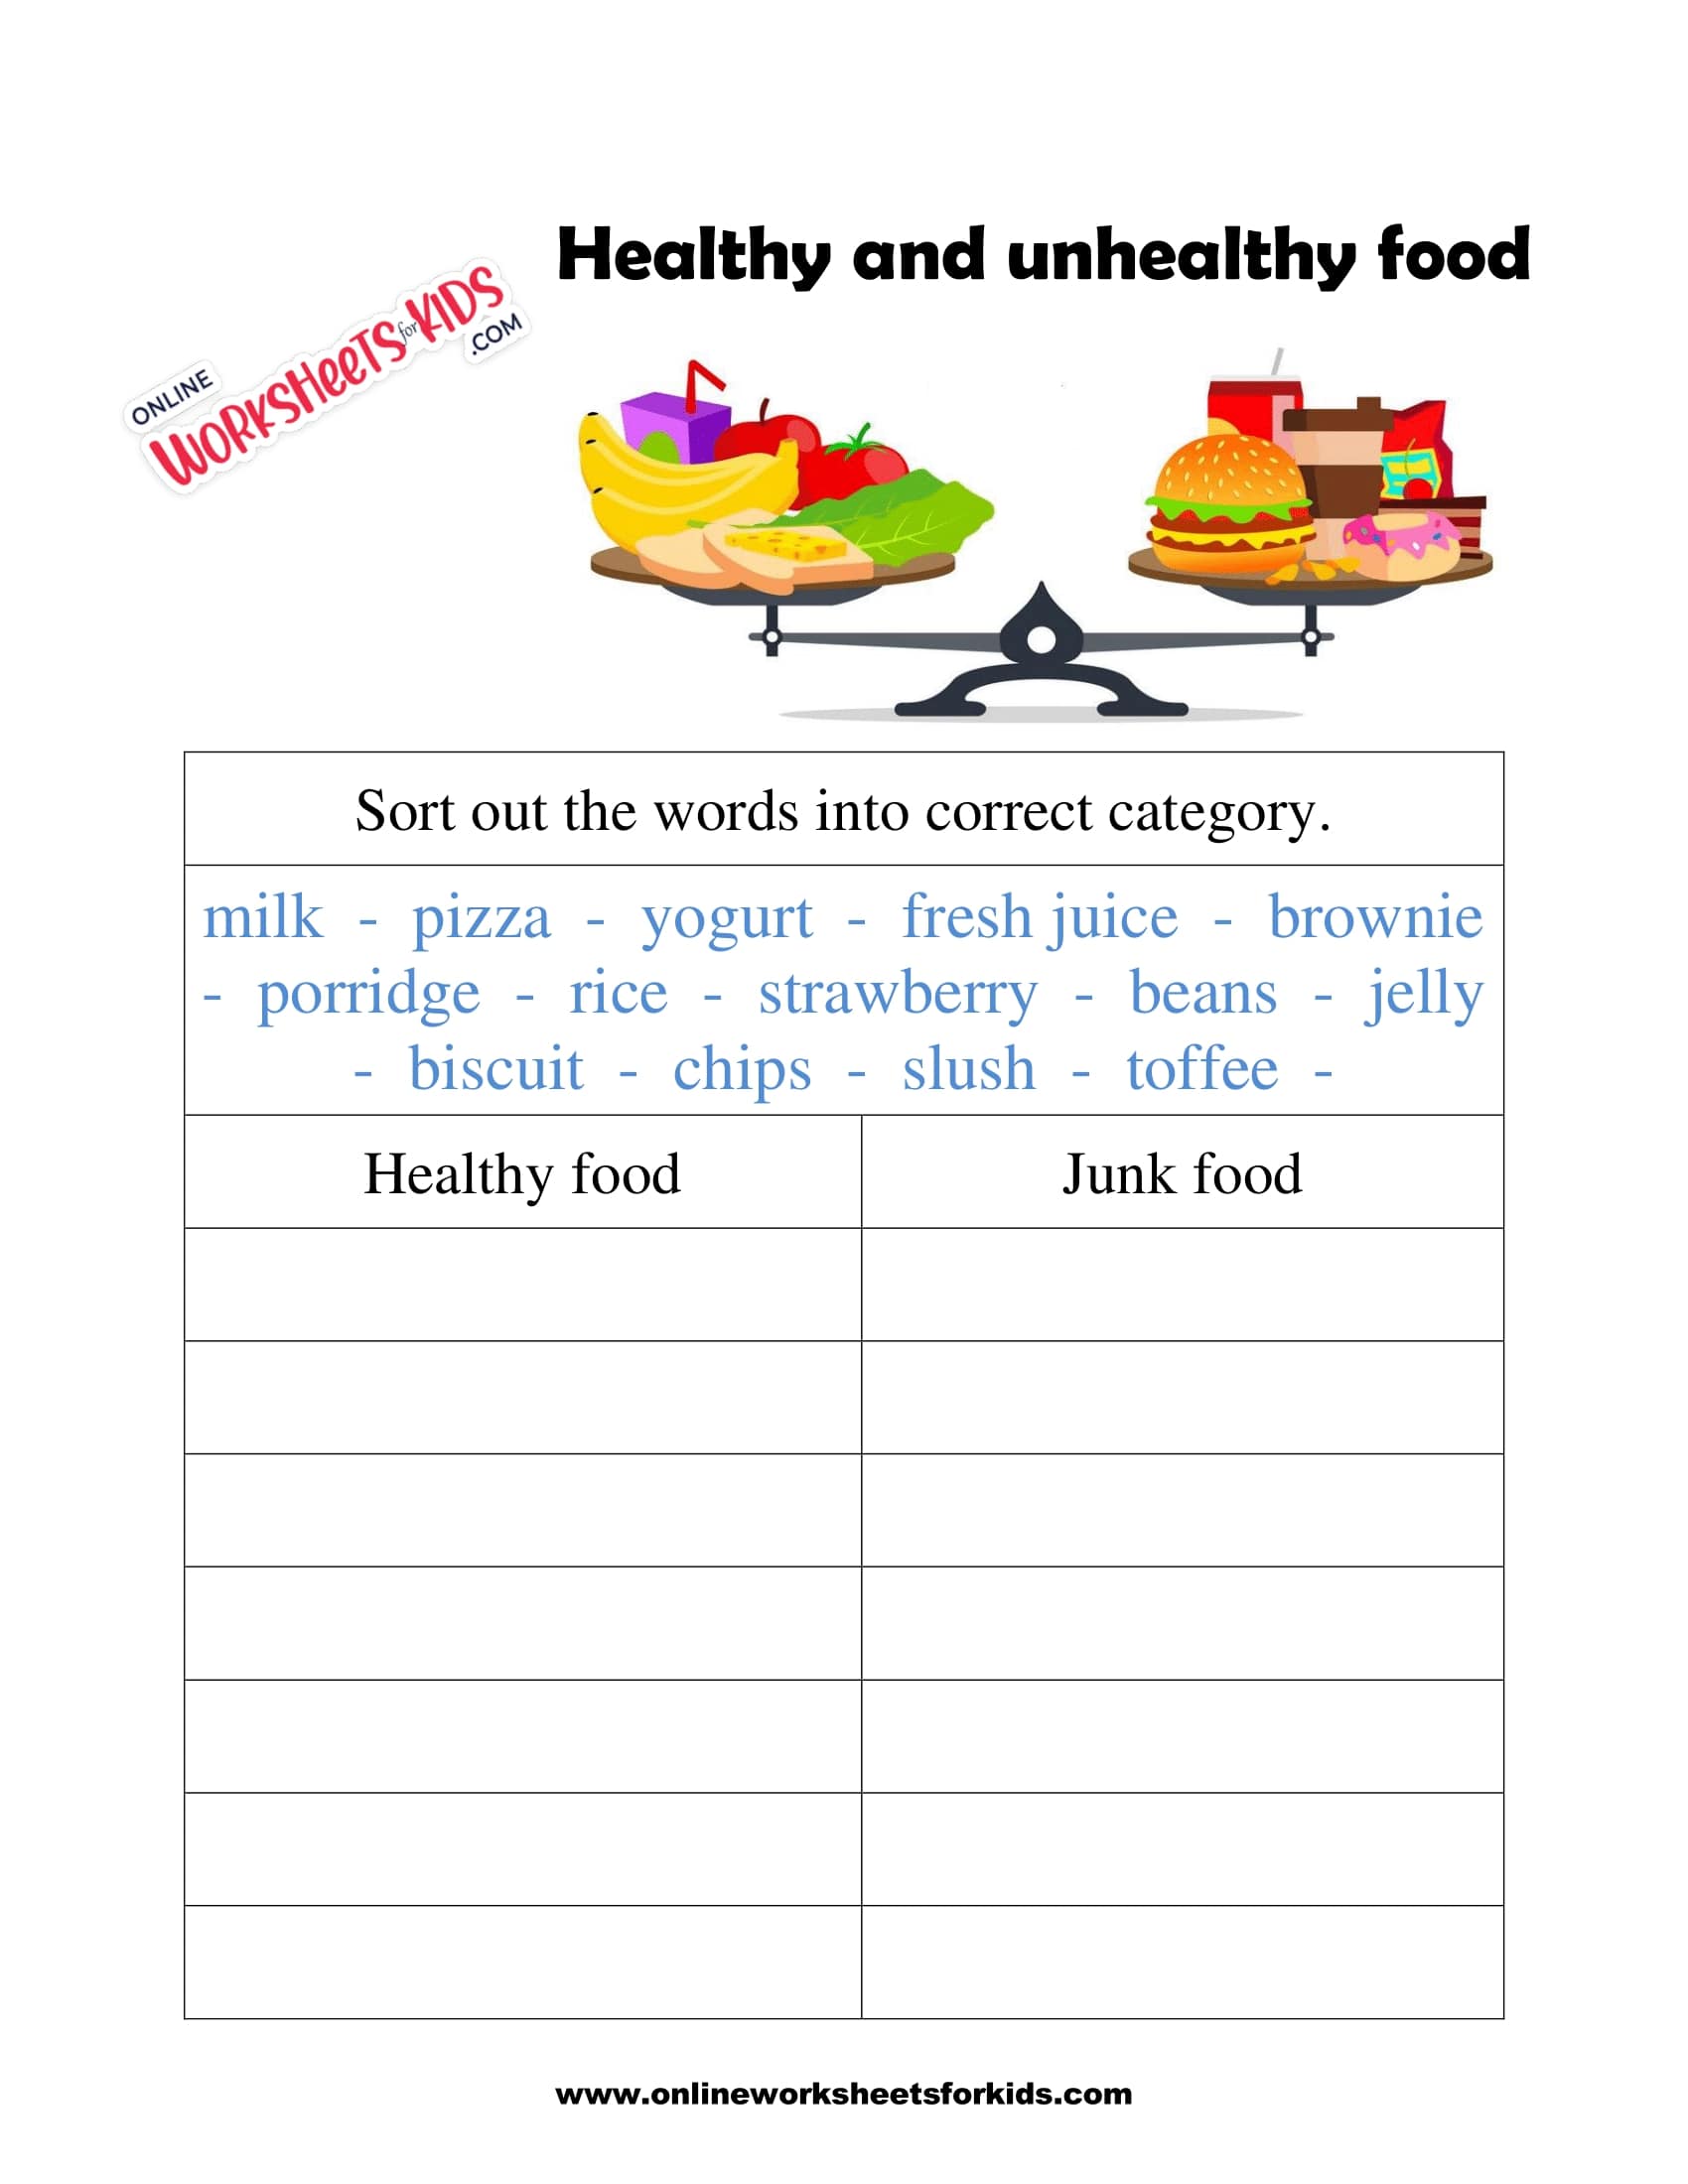 healthy-and-unhealthy-food-worksheets-4